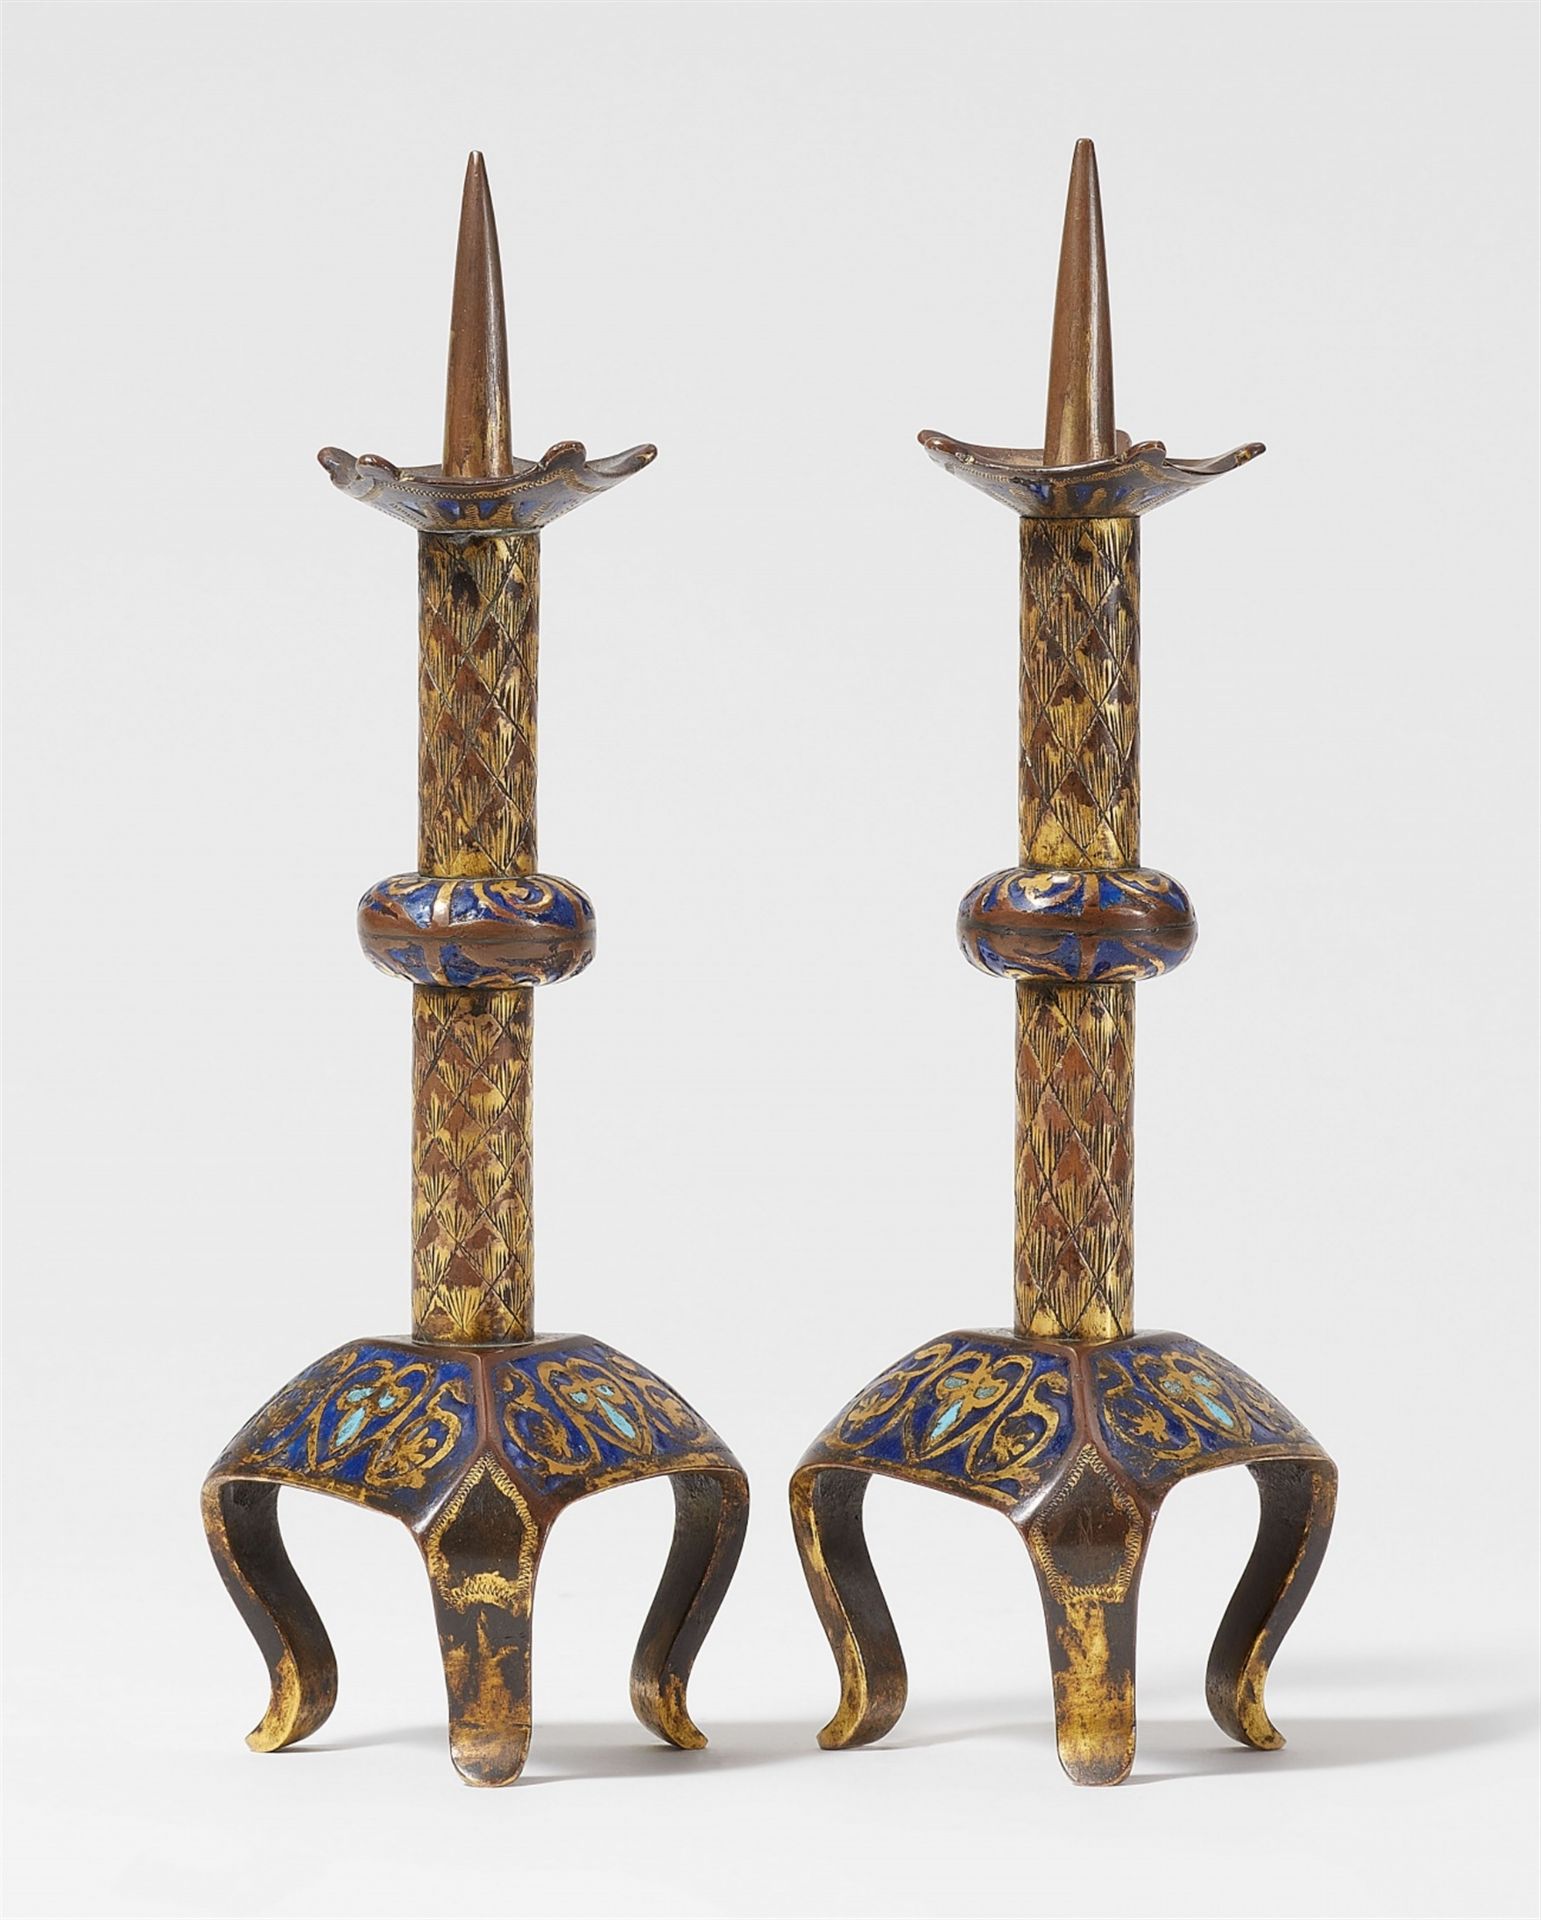 Two early 13th century Limoges enamel candlesticks